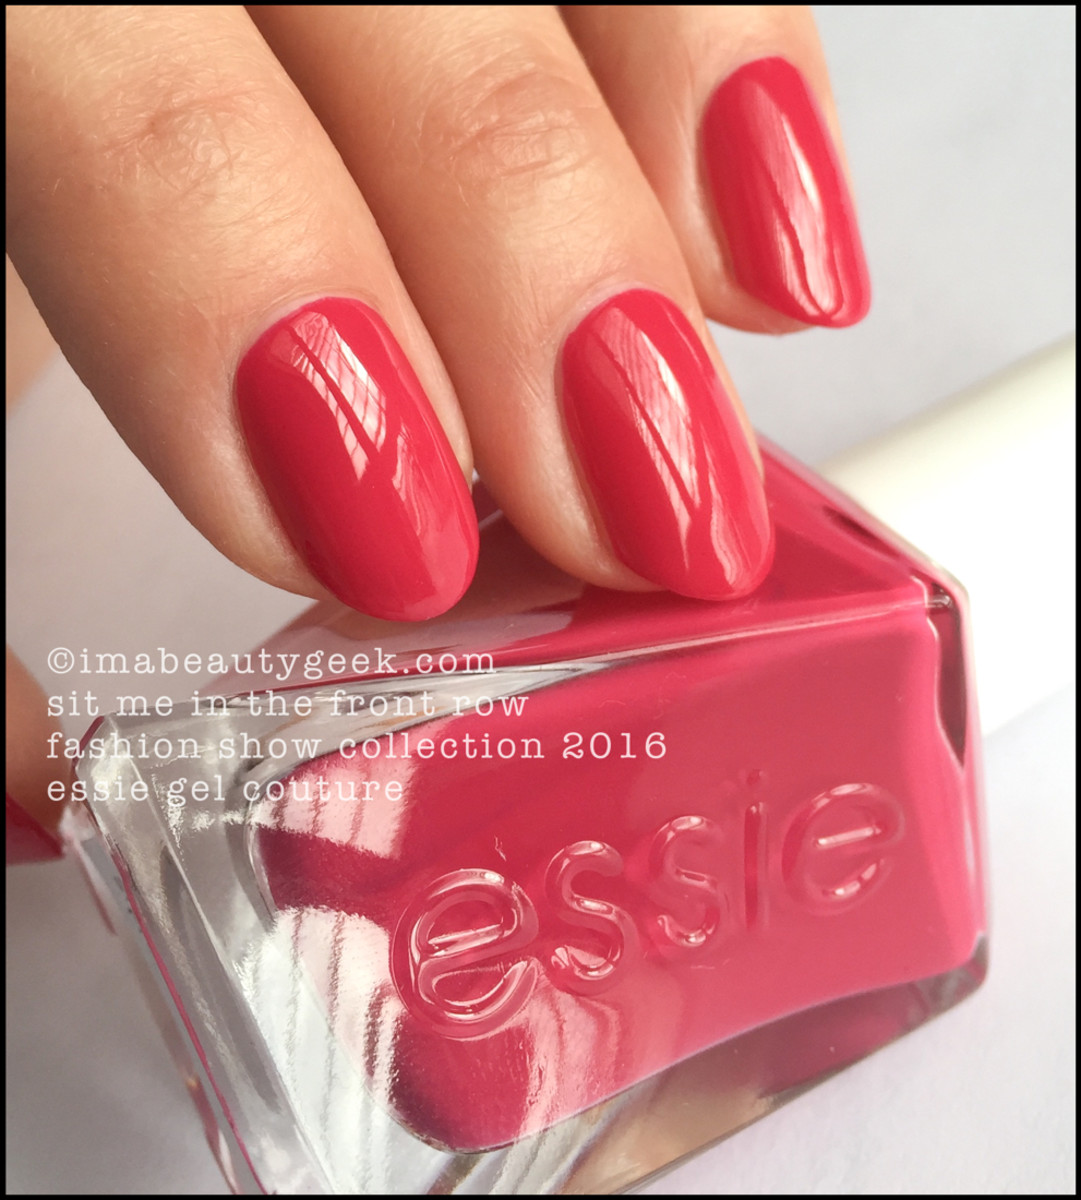 Essie Gel Couture Review Swatches_Essie Sit Me in the Front Row 2016